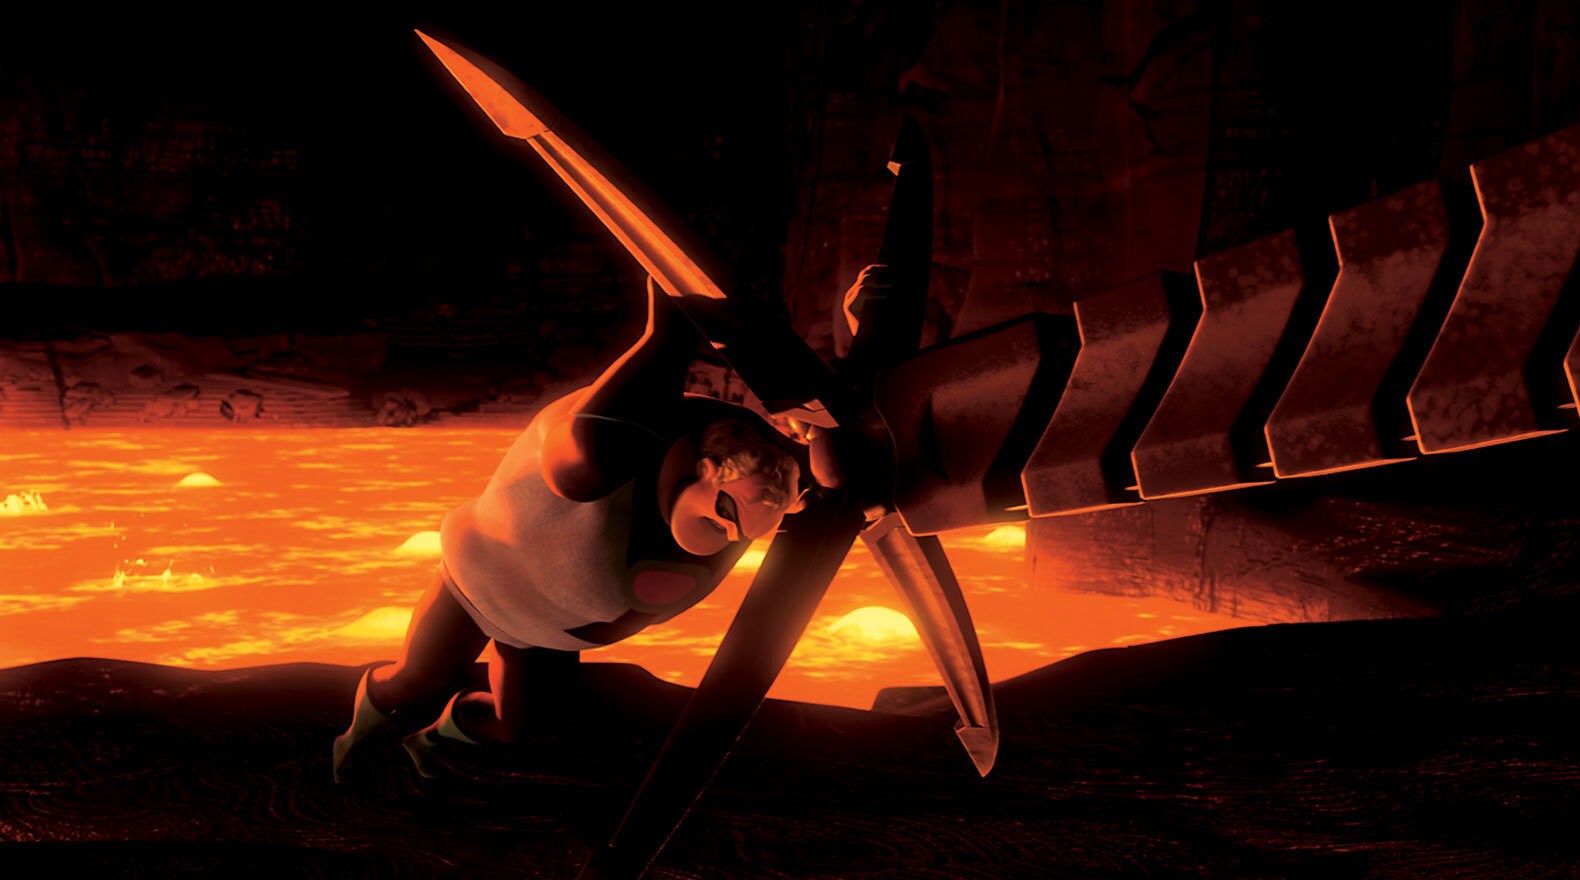 Mr. Incredible’s strength is pitted against the Omnidroid’s in "The Incredibles".